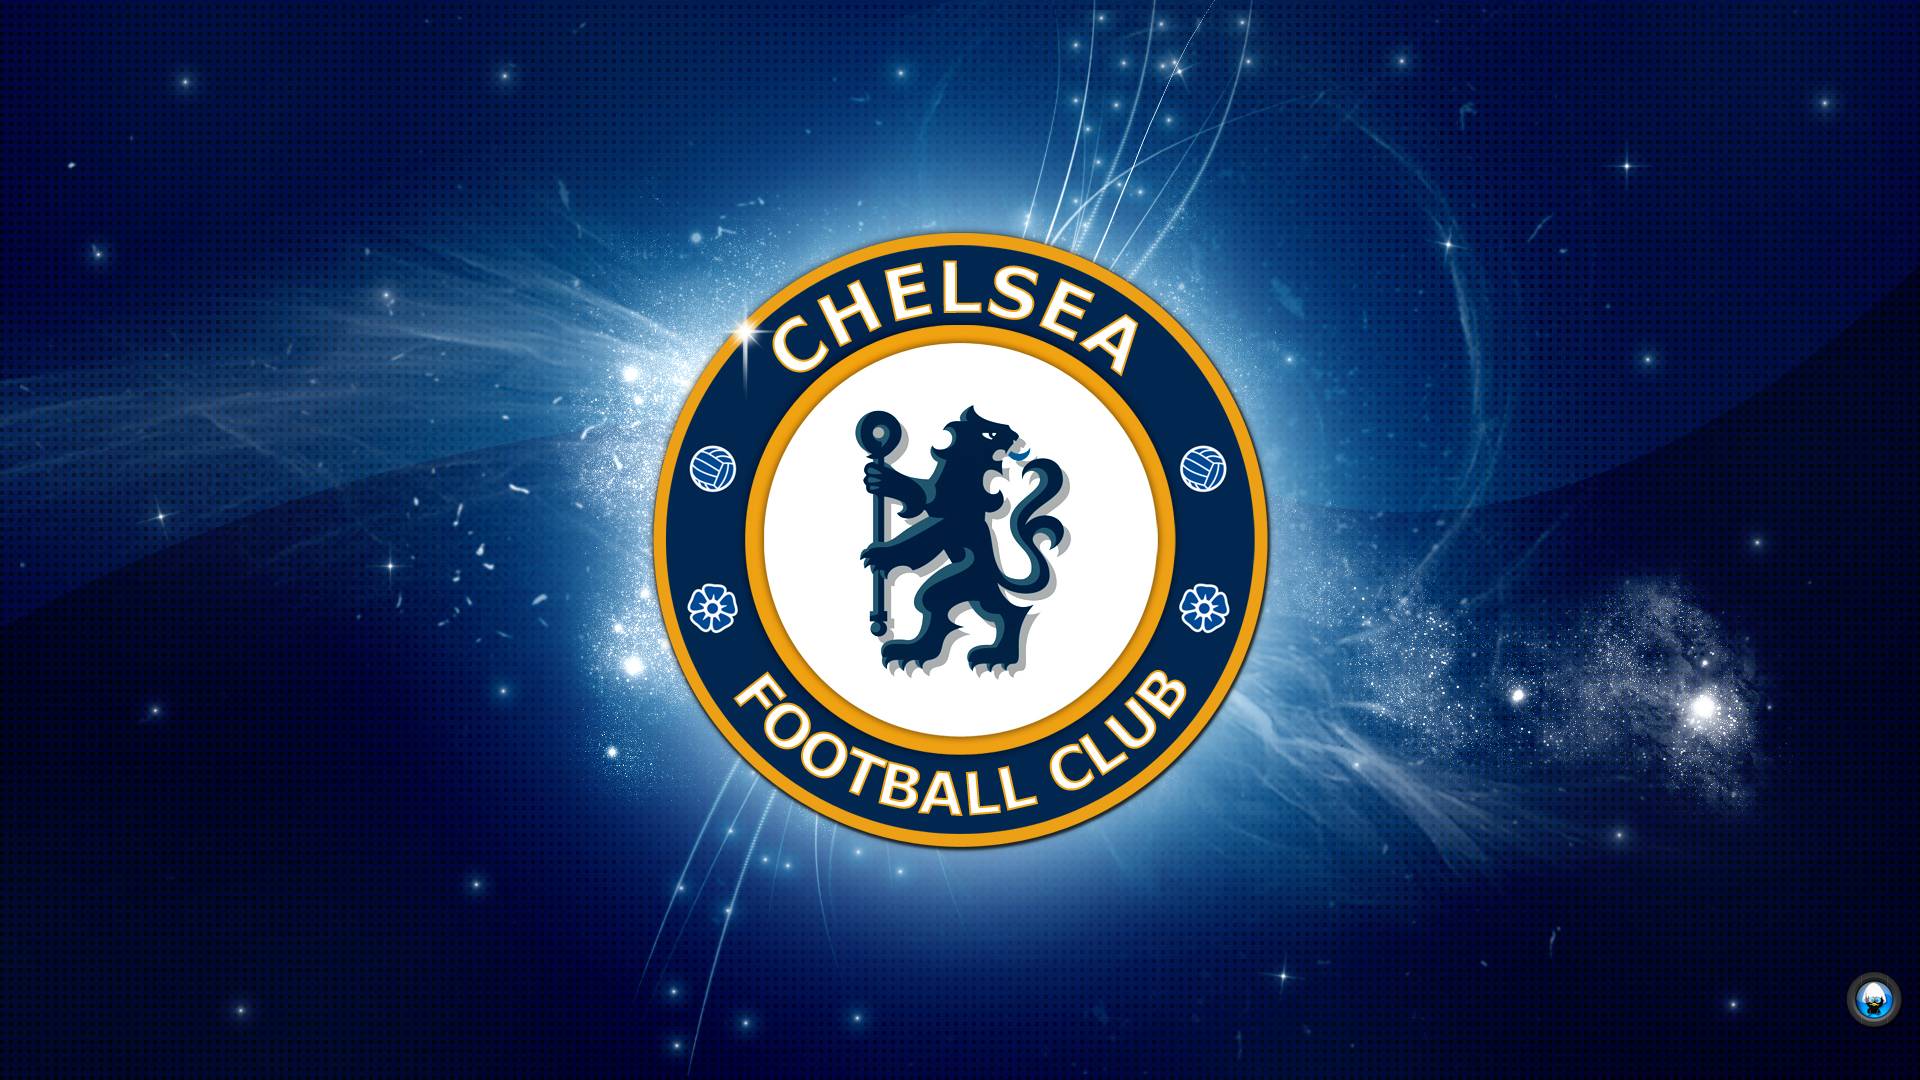 Latest Chelsea FC Logo Picture Screen Hi Def Background